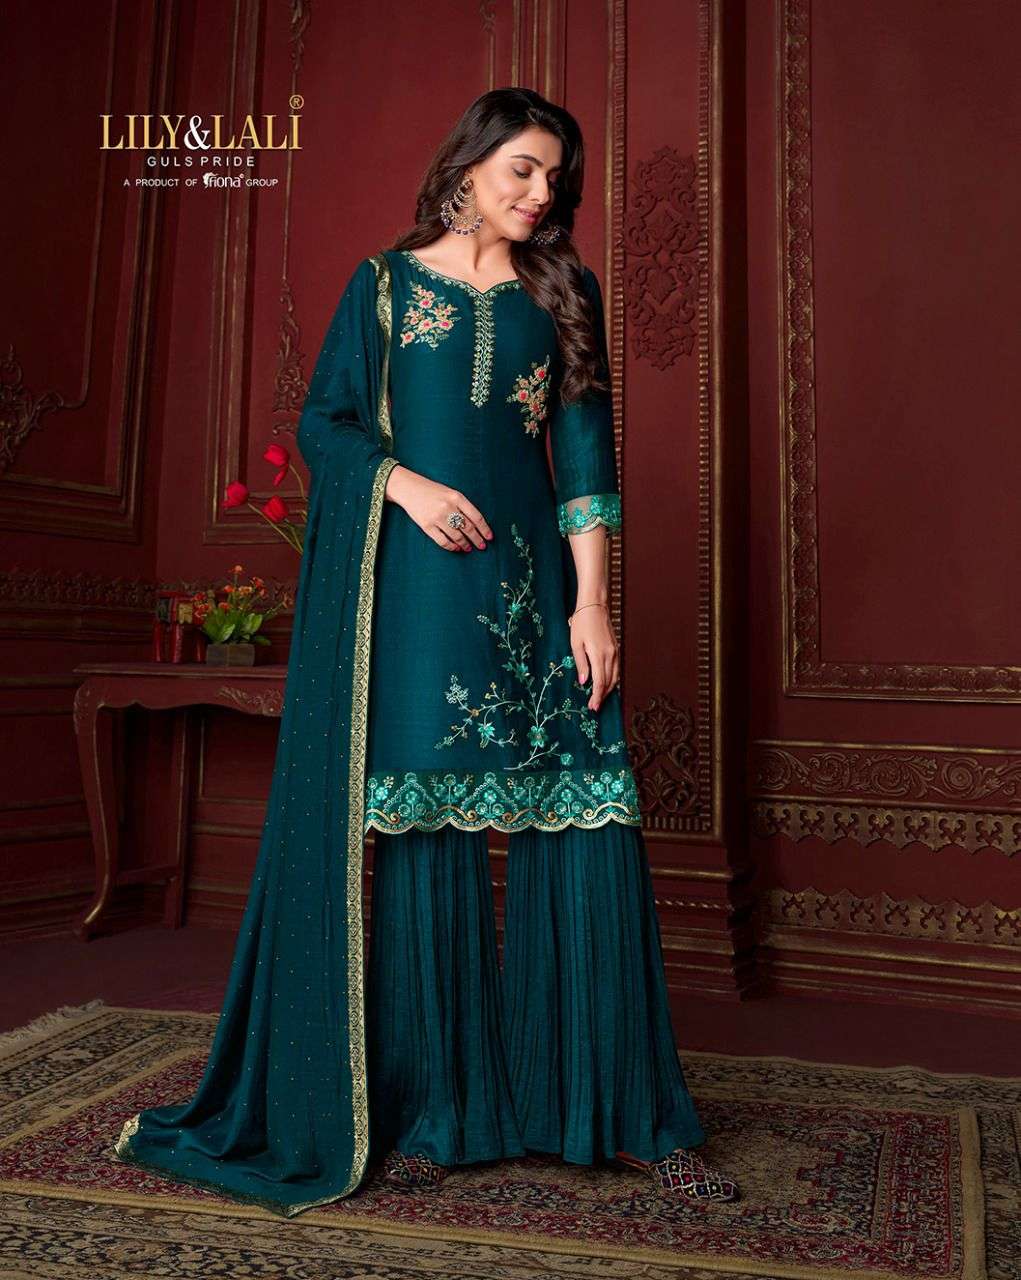 lily & lali malang 10191-10196 series designer wear ready made silk suits online shopping surat 